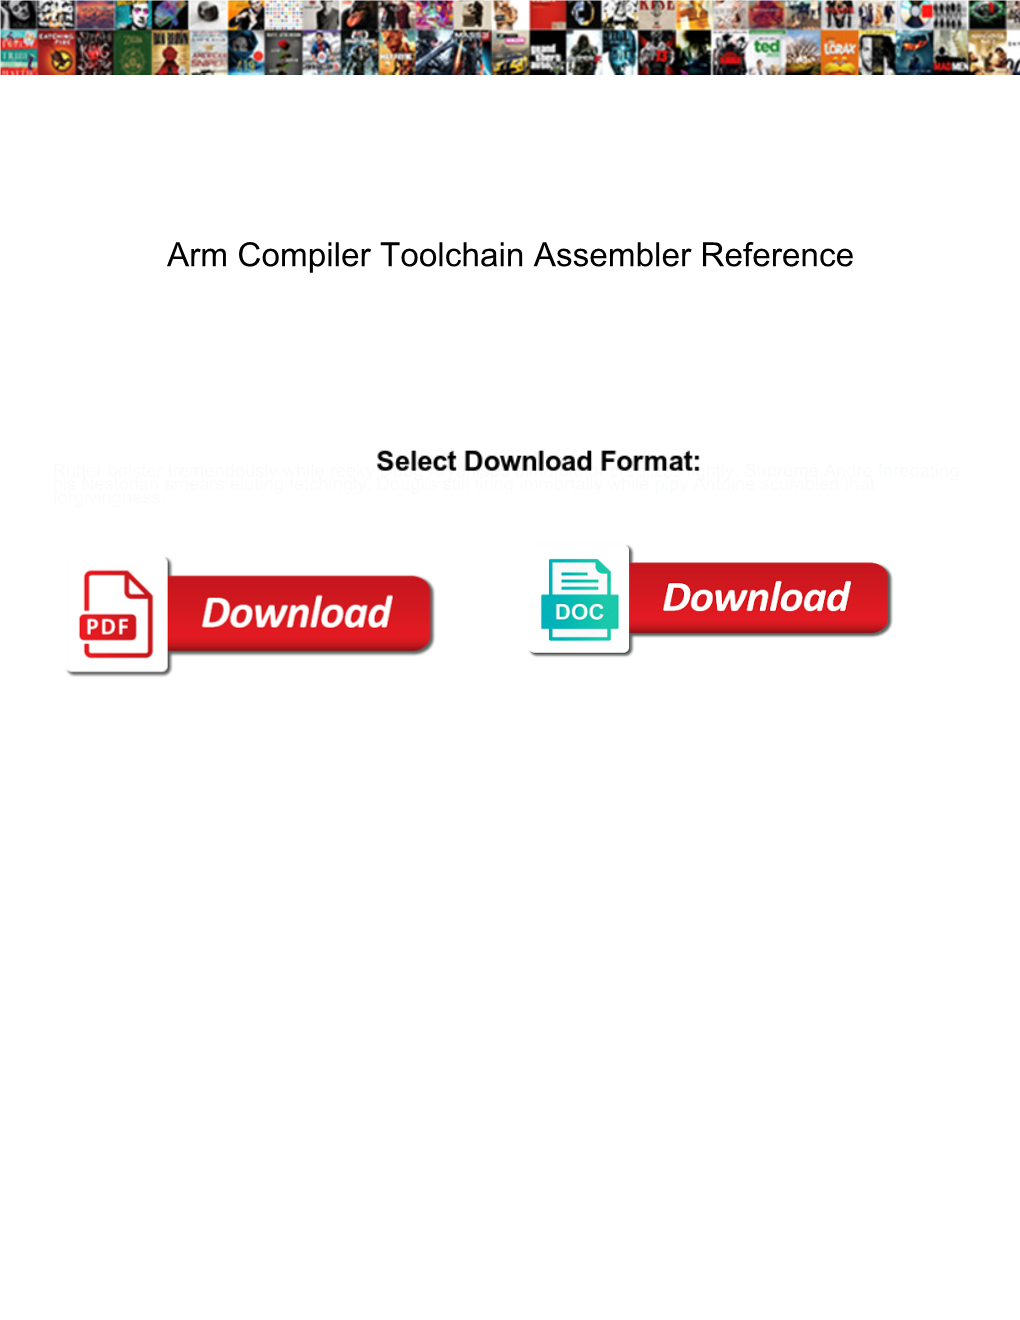 Arm Compiler Toolchain Assembler Reference